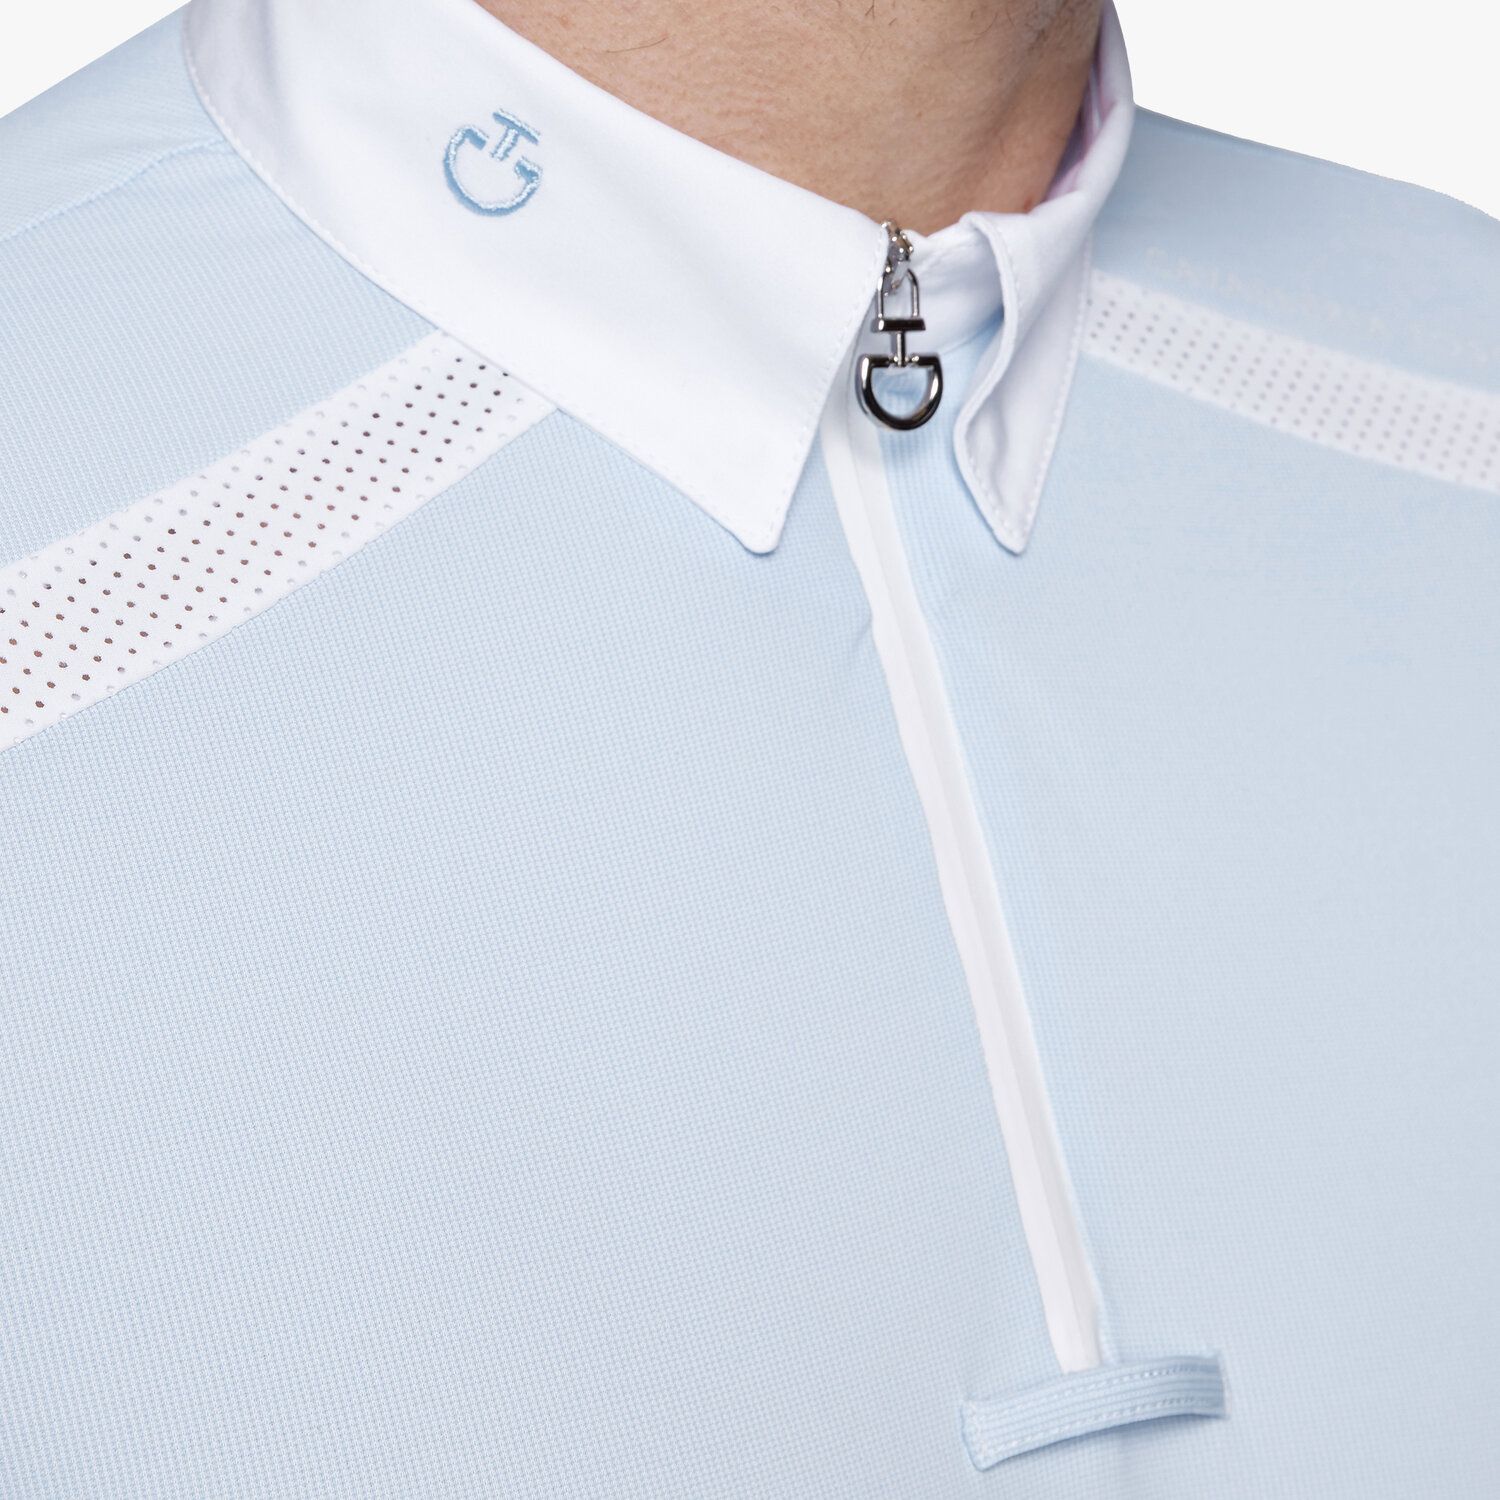 Cavalleria Toscana Men's polo shirt in piqué and perforated jersey LIGHT BLUE SQUARE-3